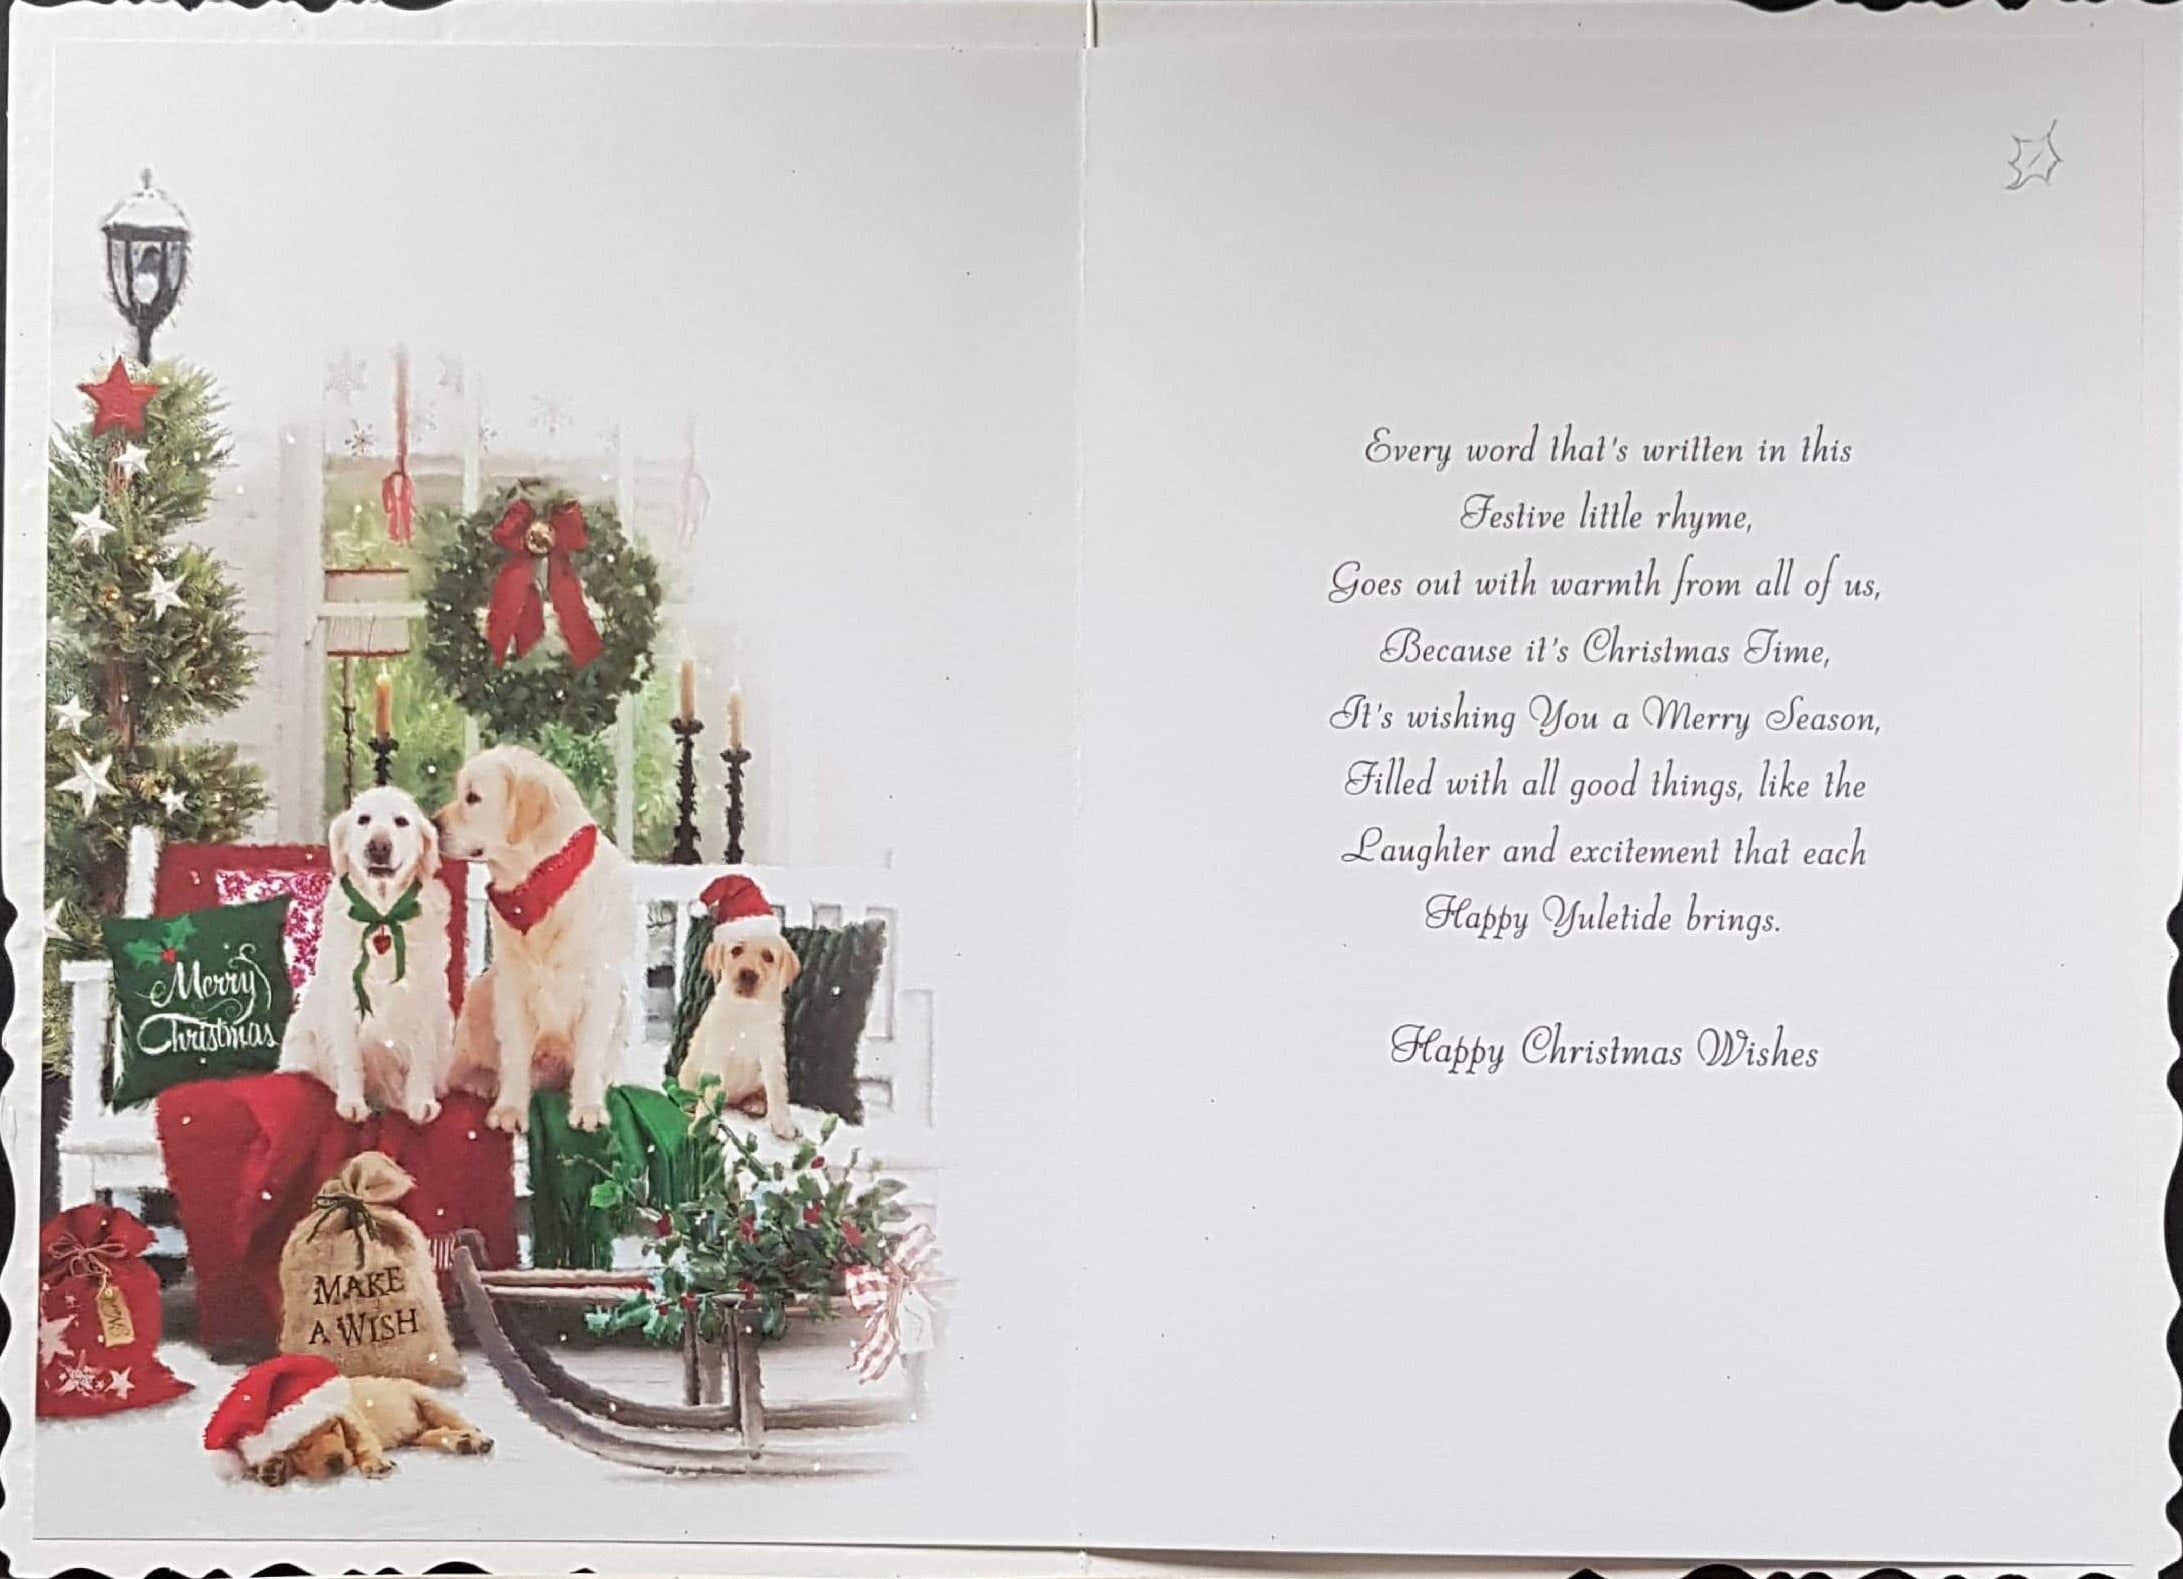 From All The Family Christmas Card - Happy Christmas Wishes & Golden Retrievers in Decorated Room